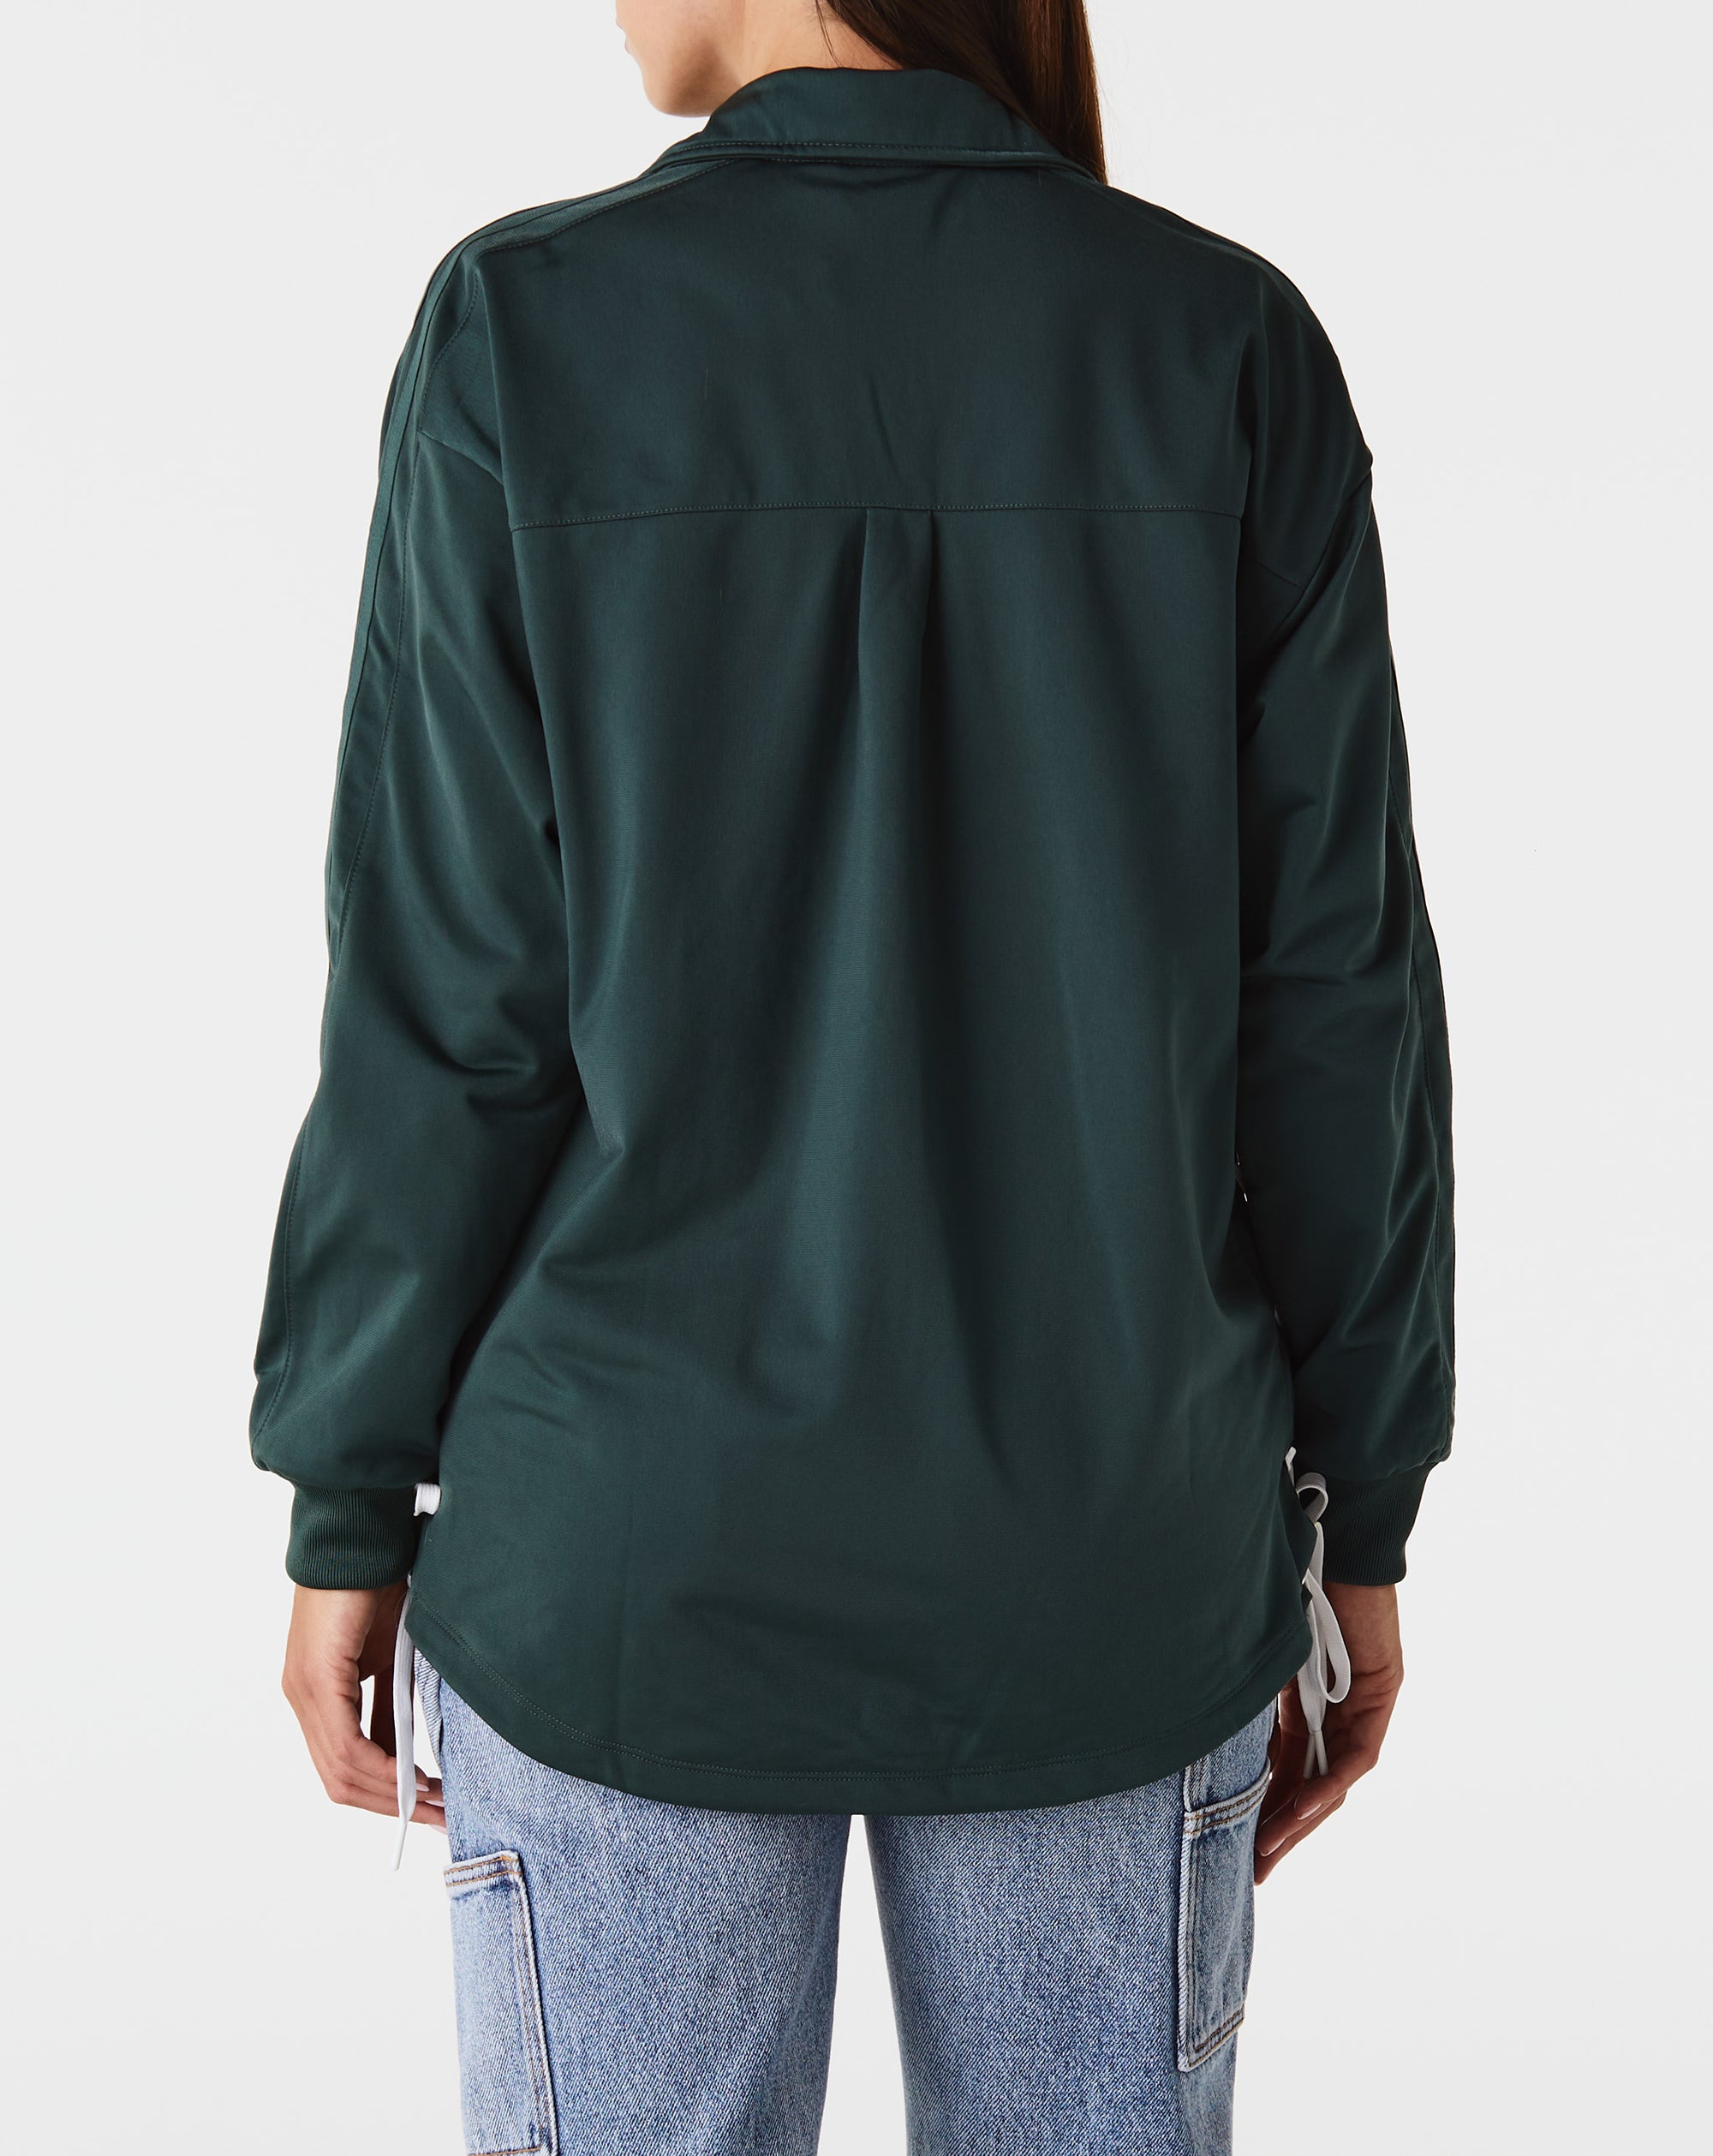 adidas Women's Always Original Laced Track Top - Rule of Next Apparel